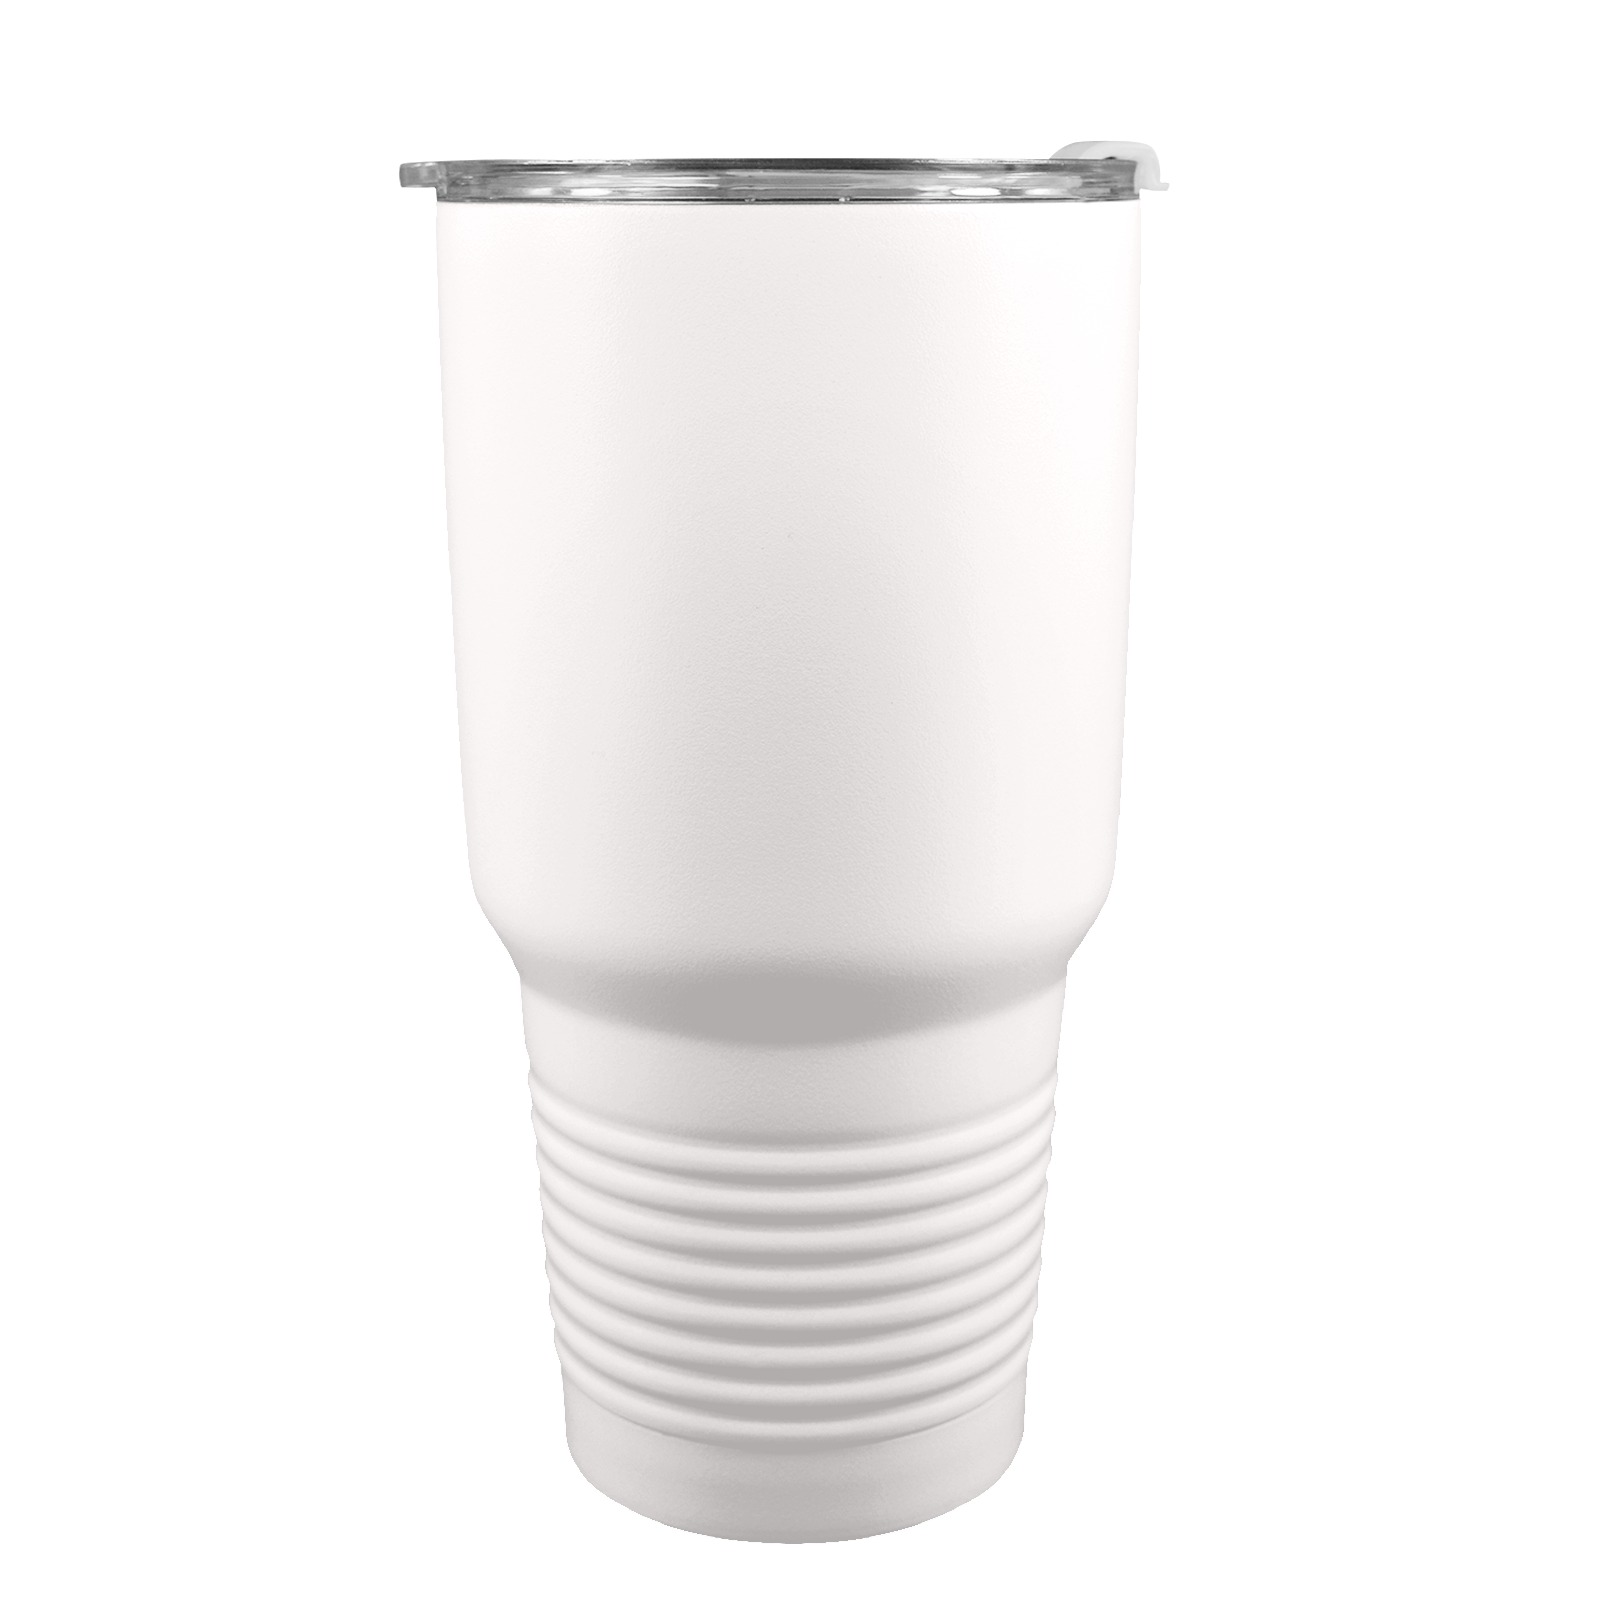 30oz Insulated Stainless Steel Mobile Tumbler